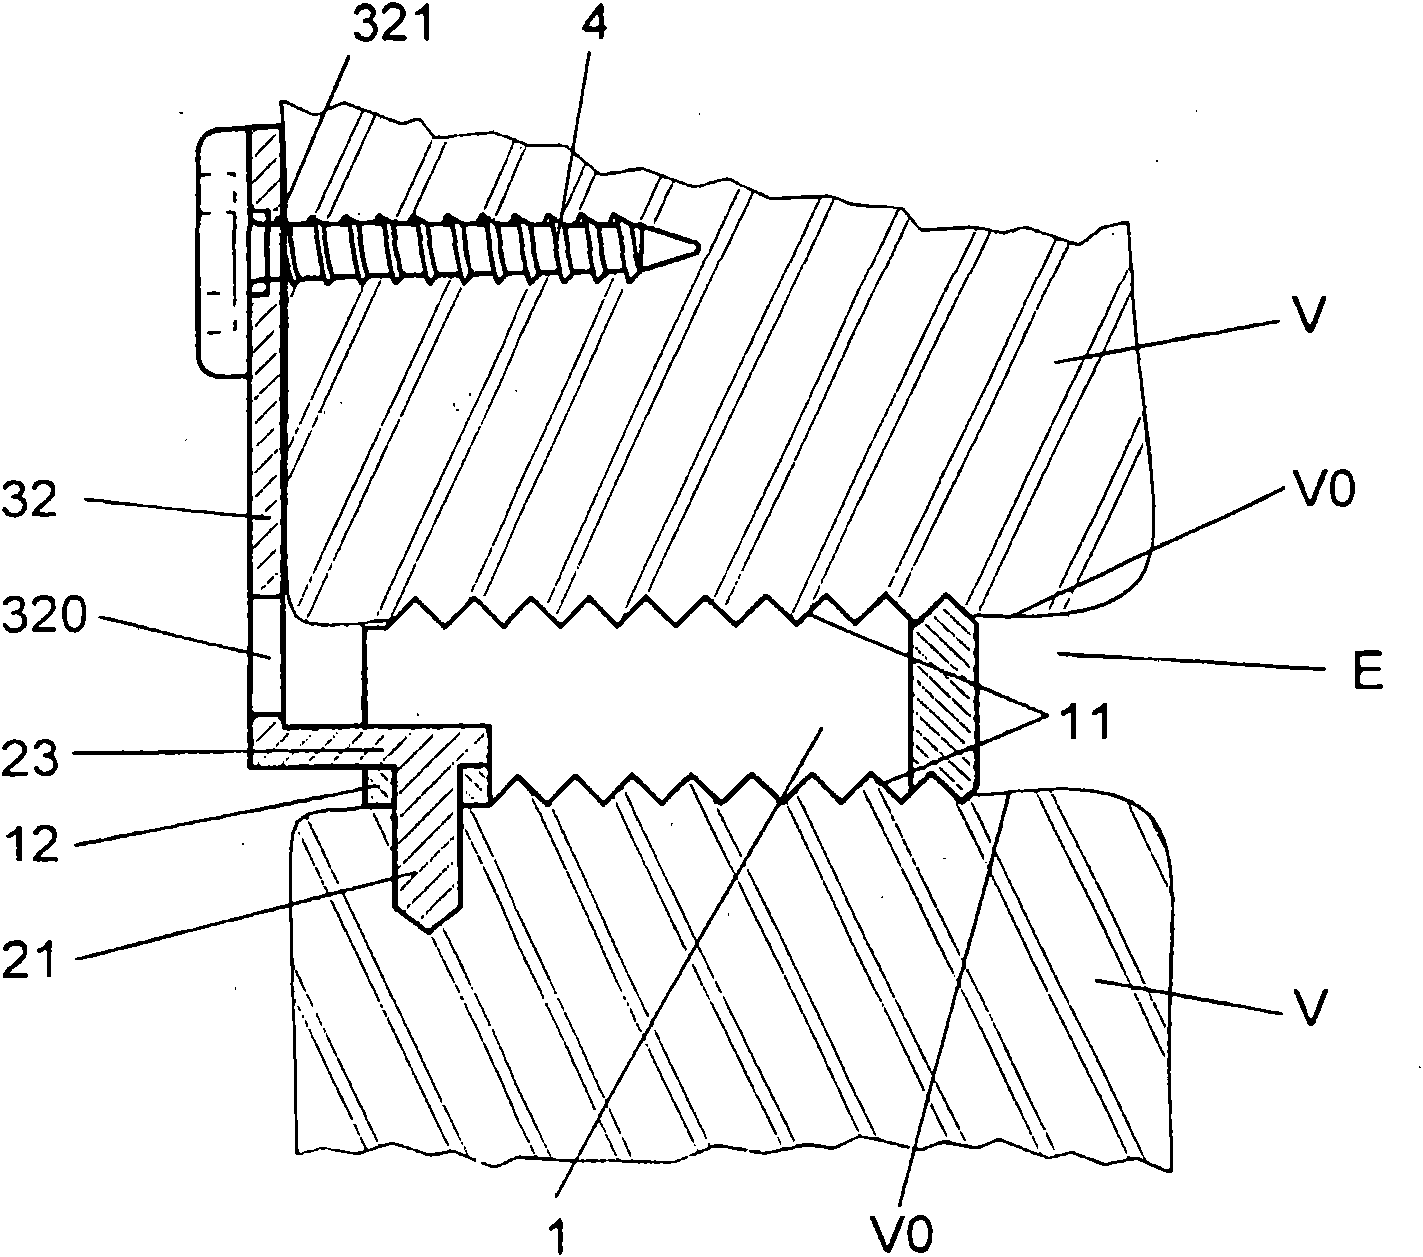 Vertebral cage device with modular fixation